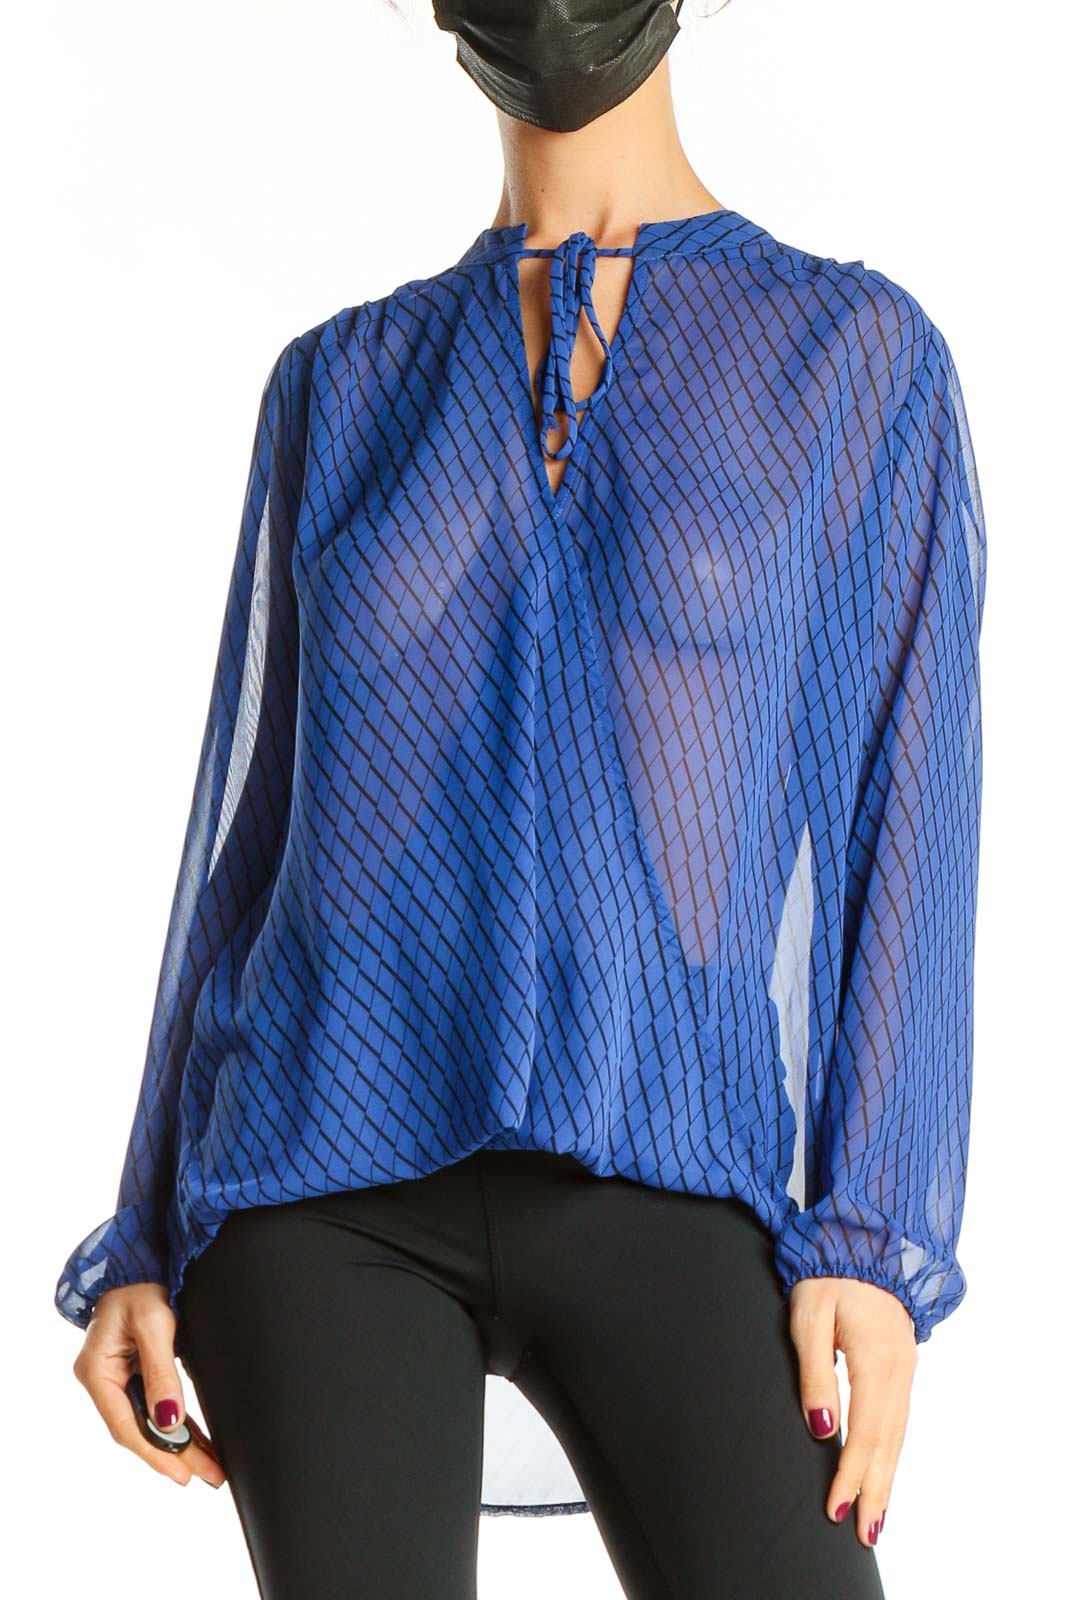 Blue Printed Chic Sheer Top Front